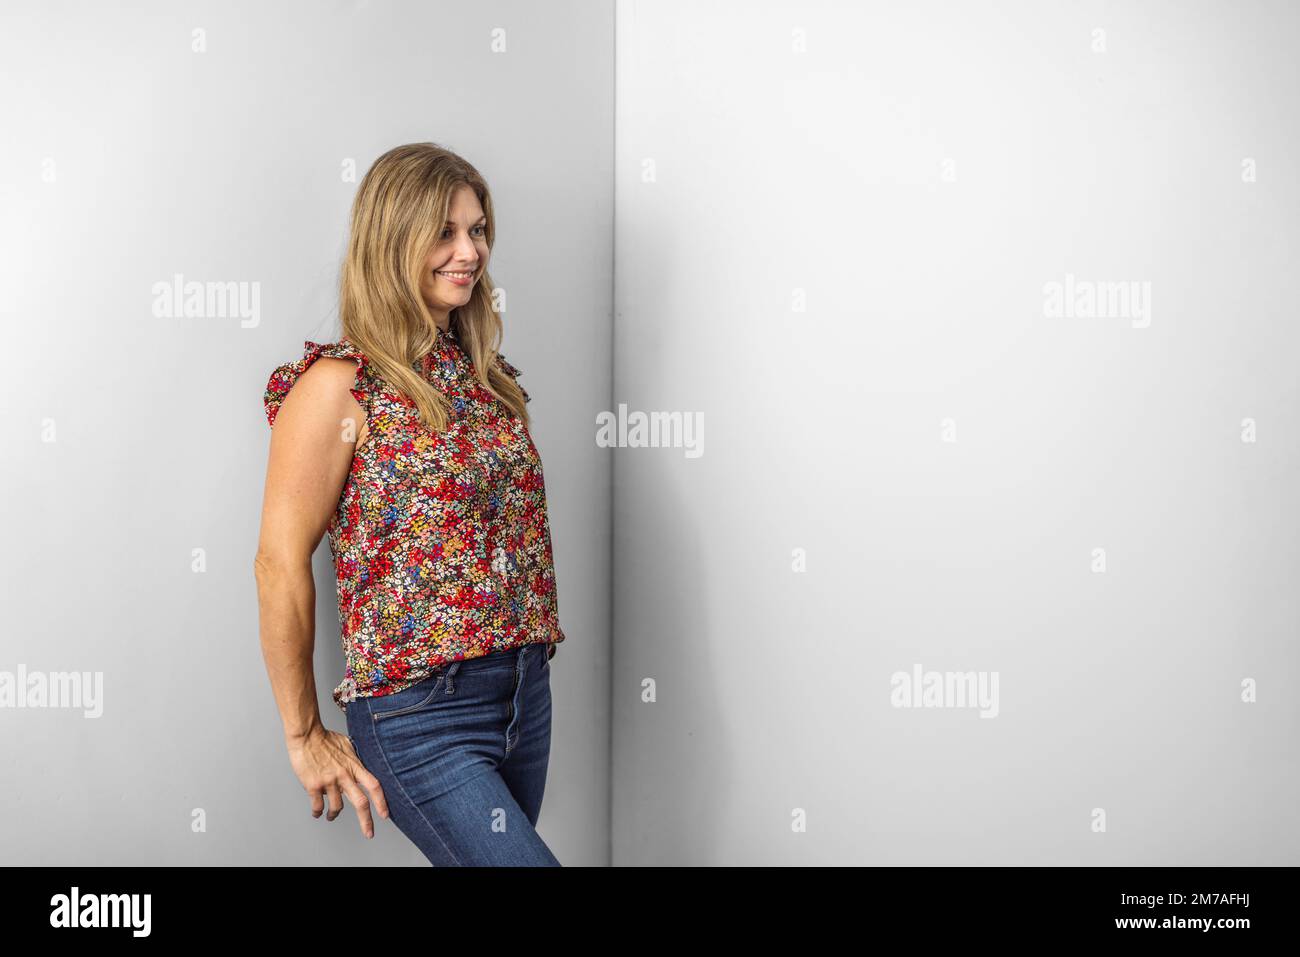 a beautiful caucasian woman in her forties in a casual floral top and denim jeans standing against a white wall with copy space Stock Photo